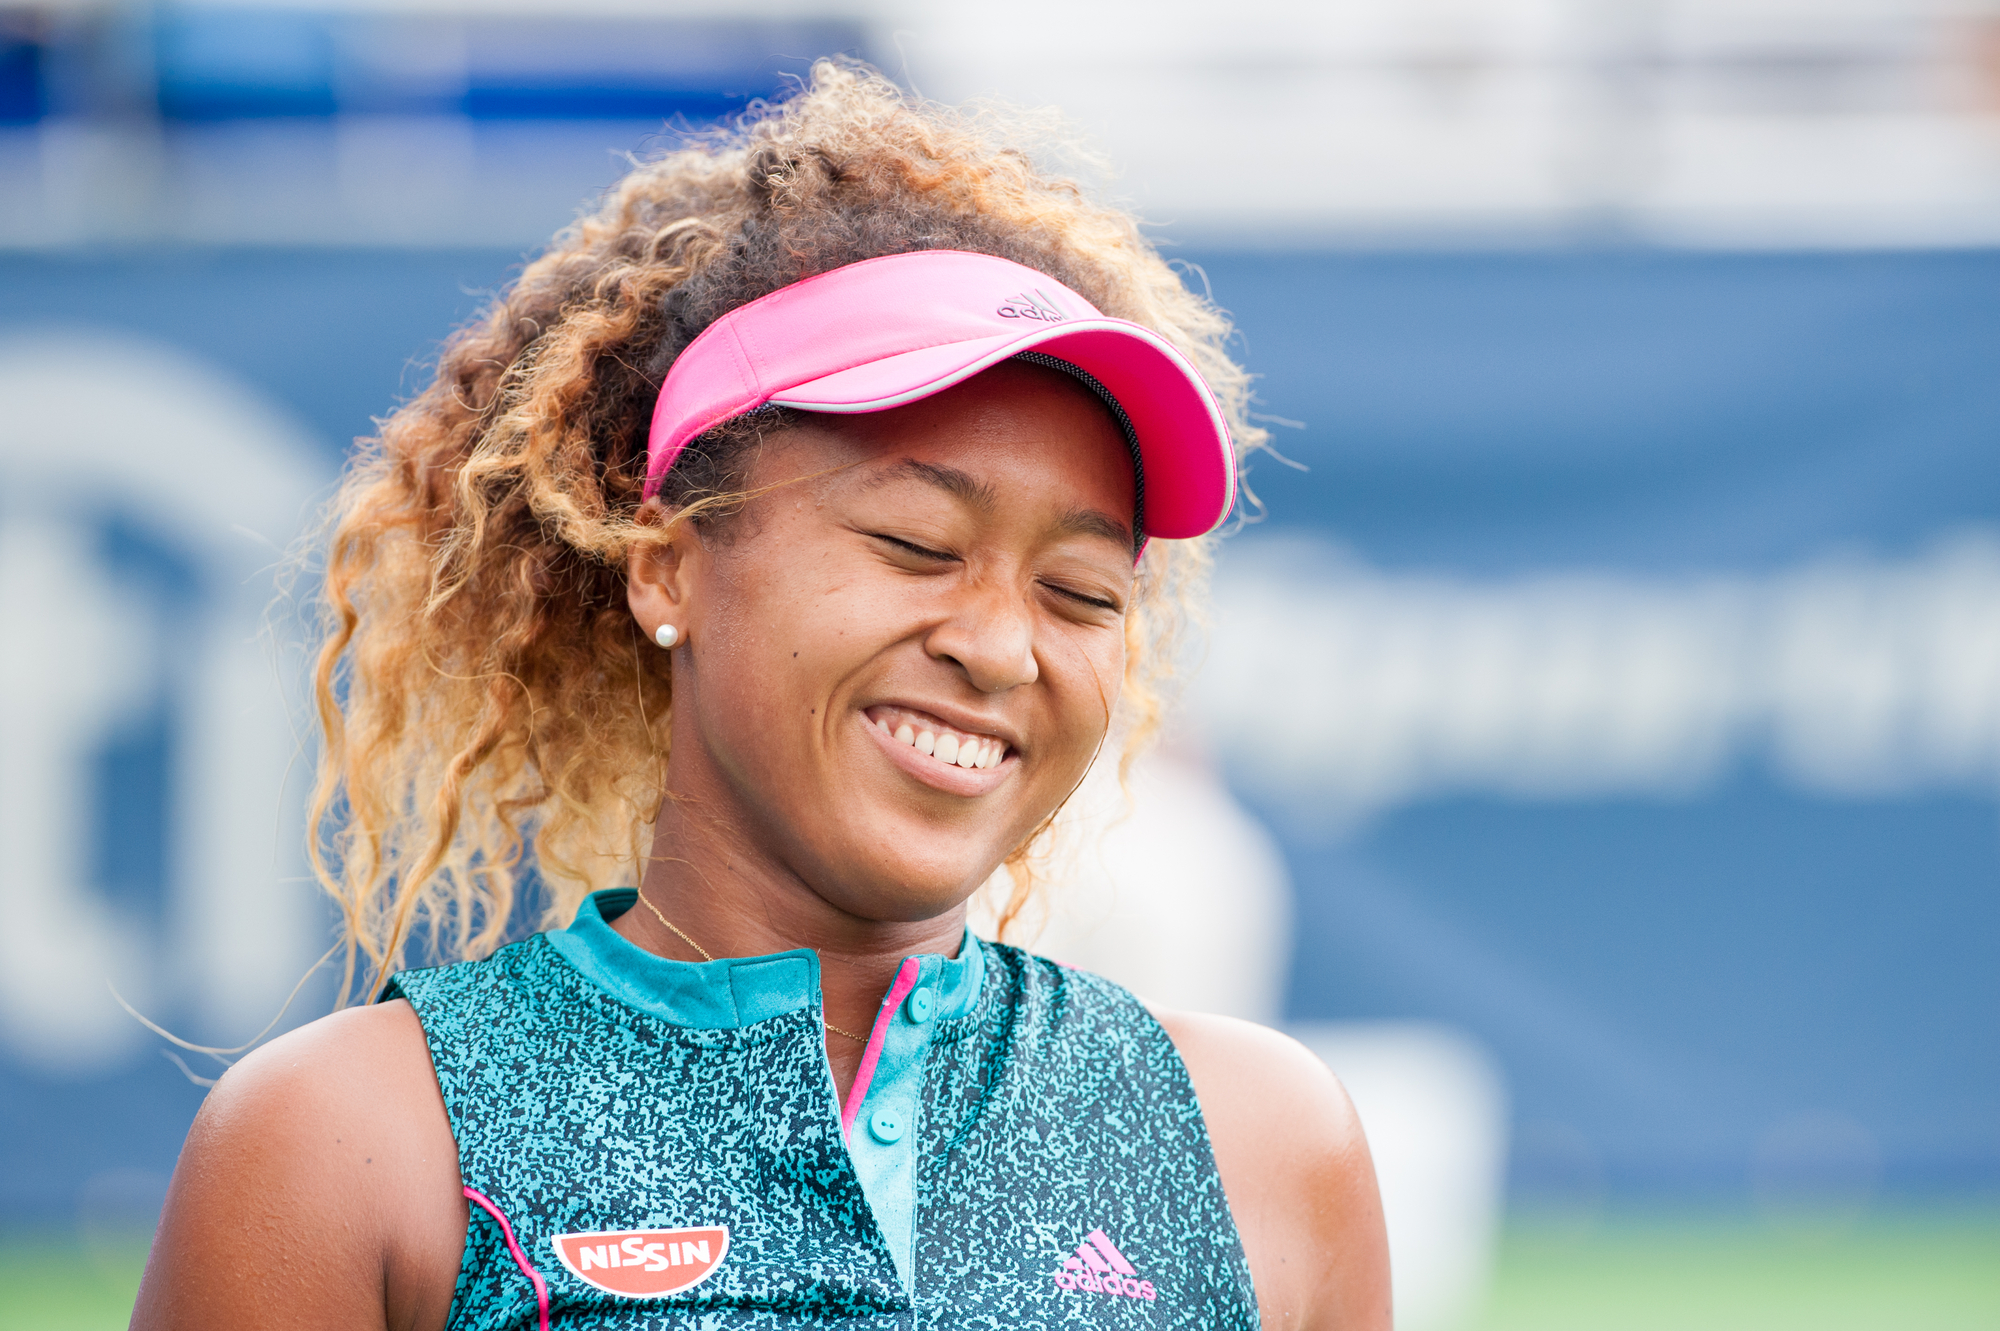 Naomi Osaka put her mental health first—and that needs to be normalized